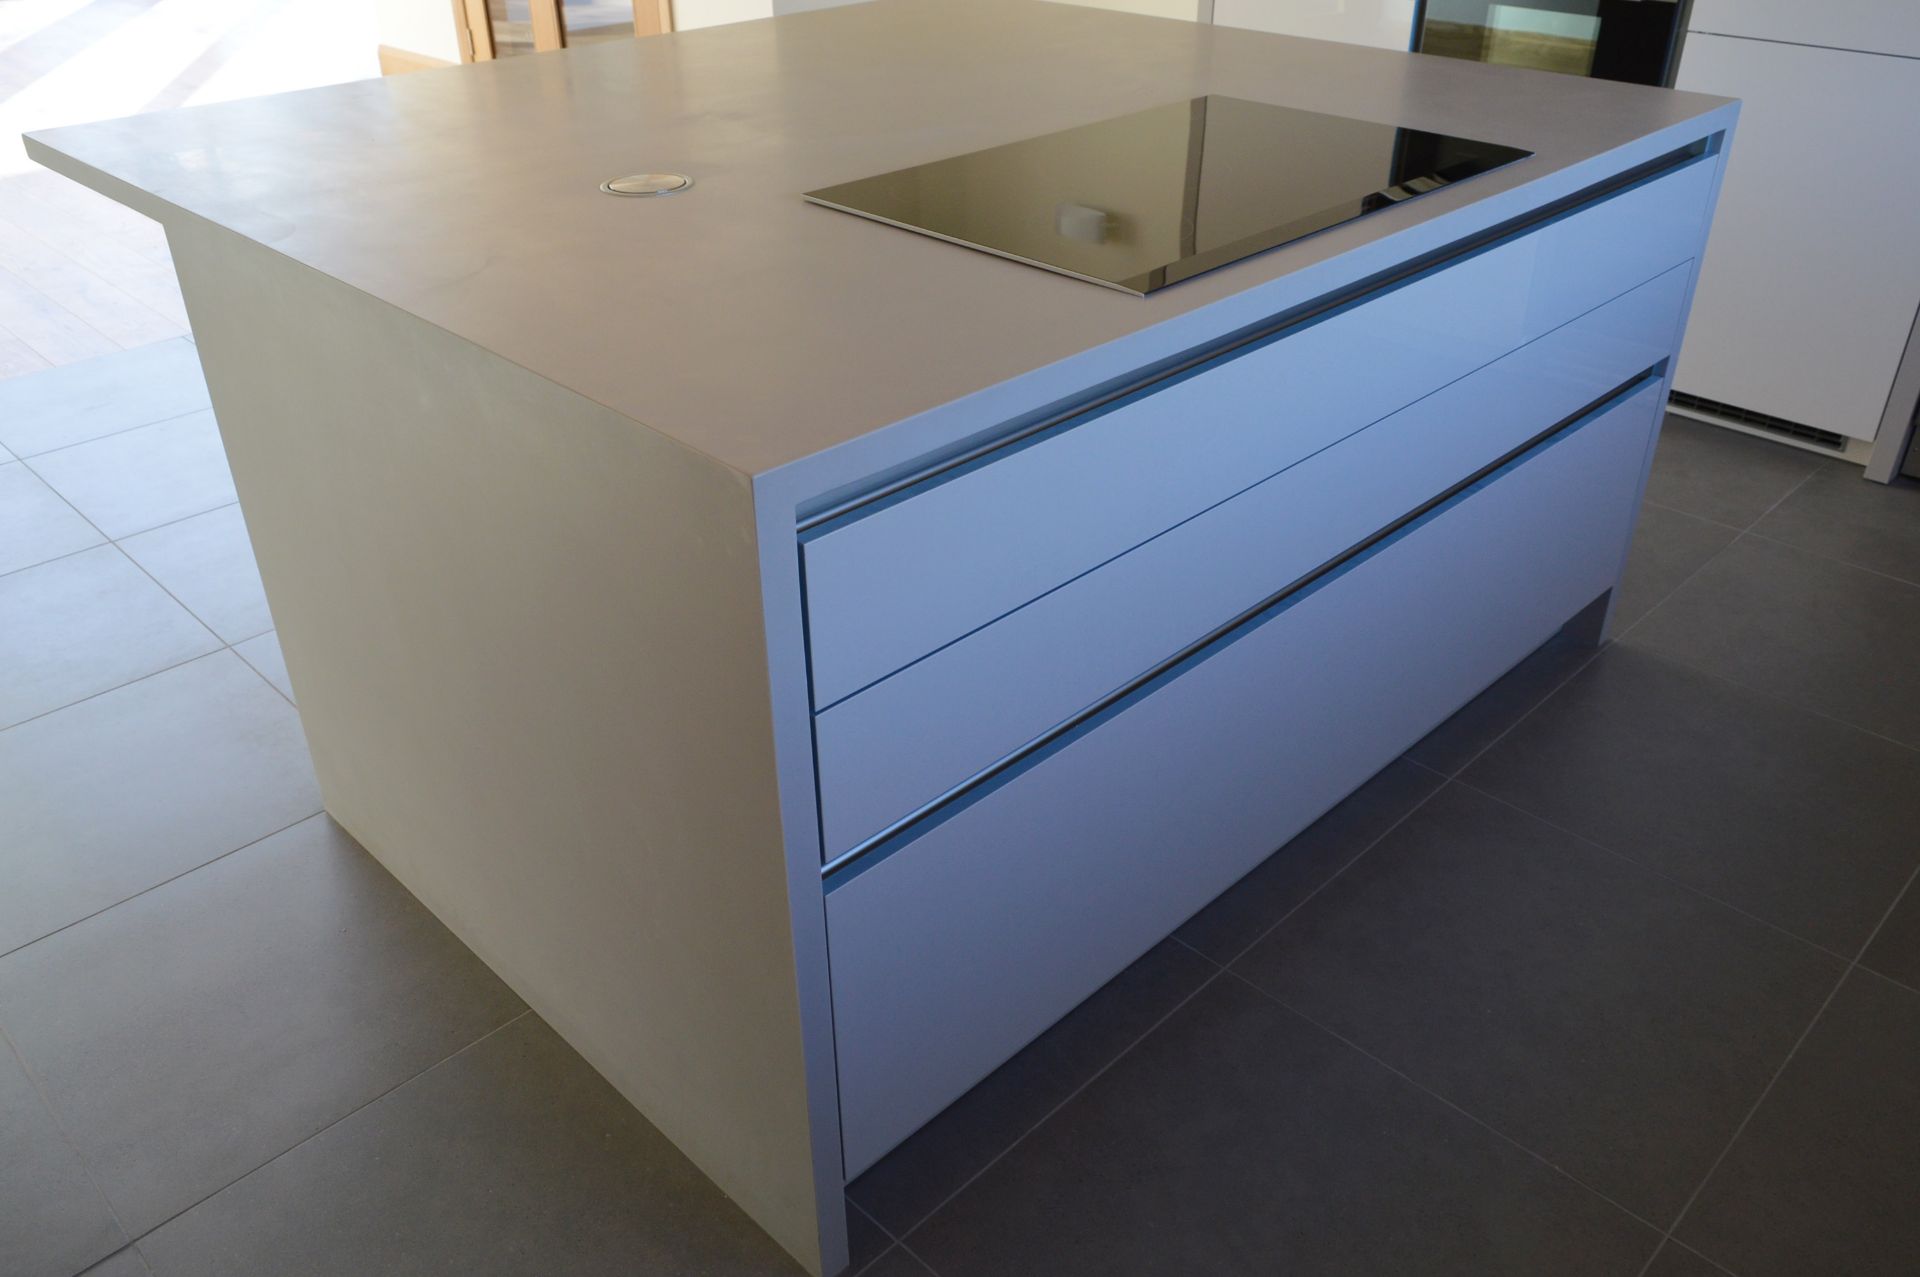 1 x Stunning KELLER Handleless FITTED KITCHEN With Corian Clay Worktops, Centre Island With - Image 94 of 104